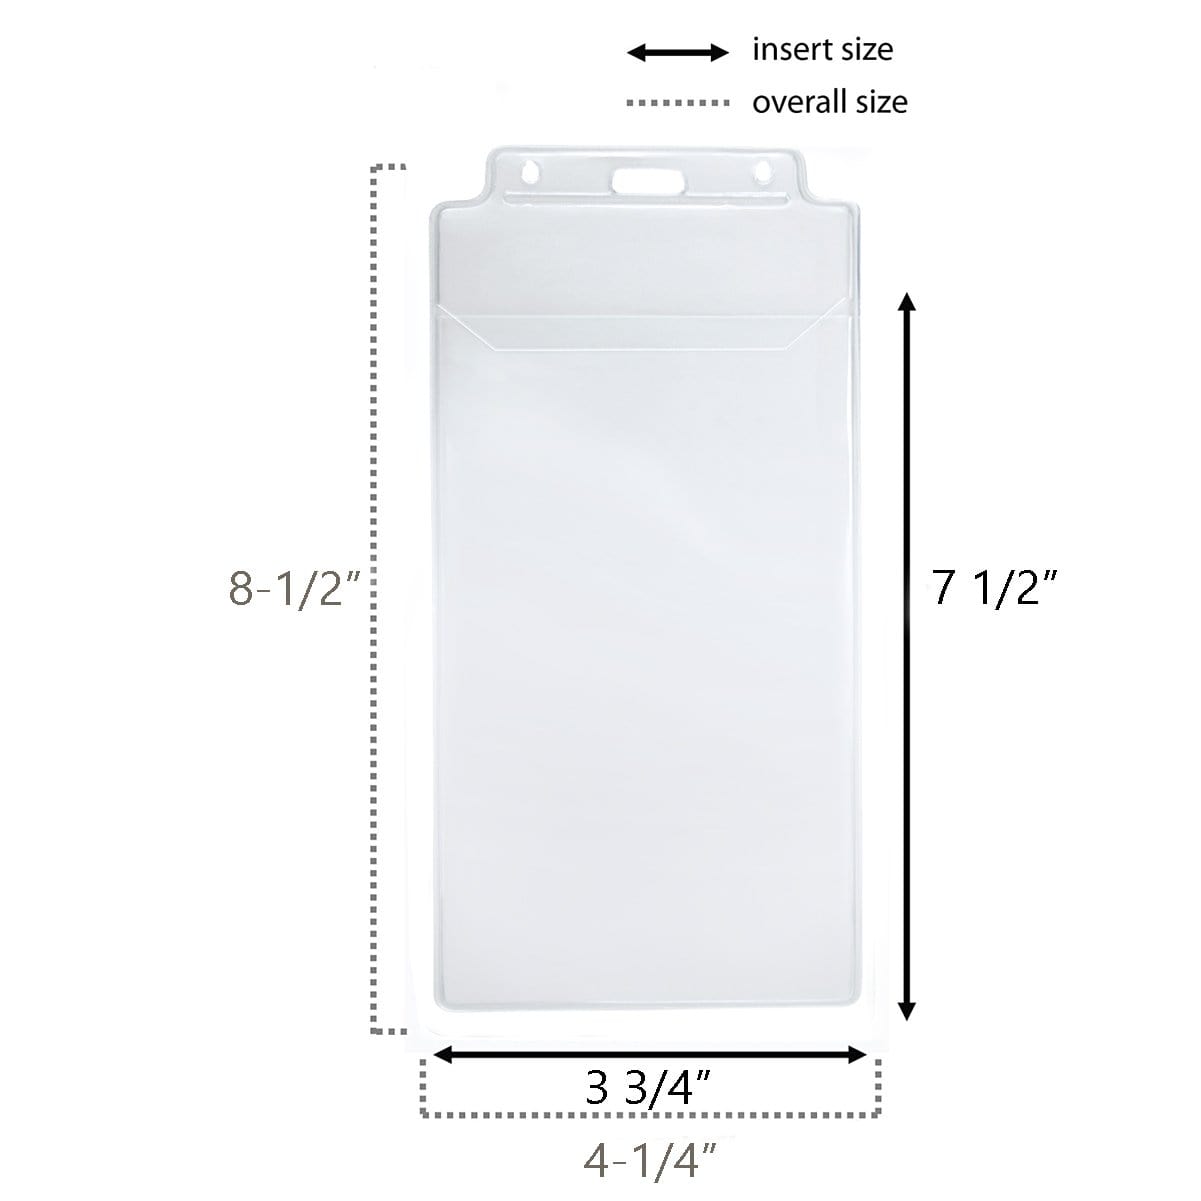 Clear 3 3/4" x 7 1/2" Vinyl Vertical Event Size Holder With Tuck-In Flap (P/N 1840-1600) 1840-1600